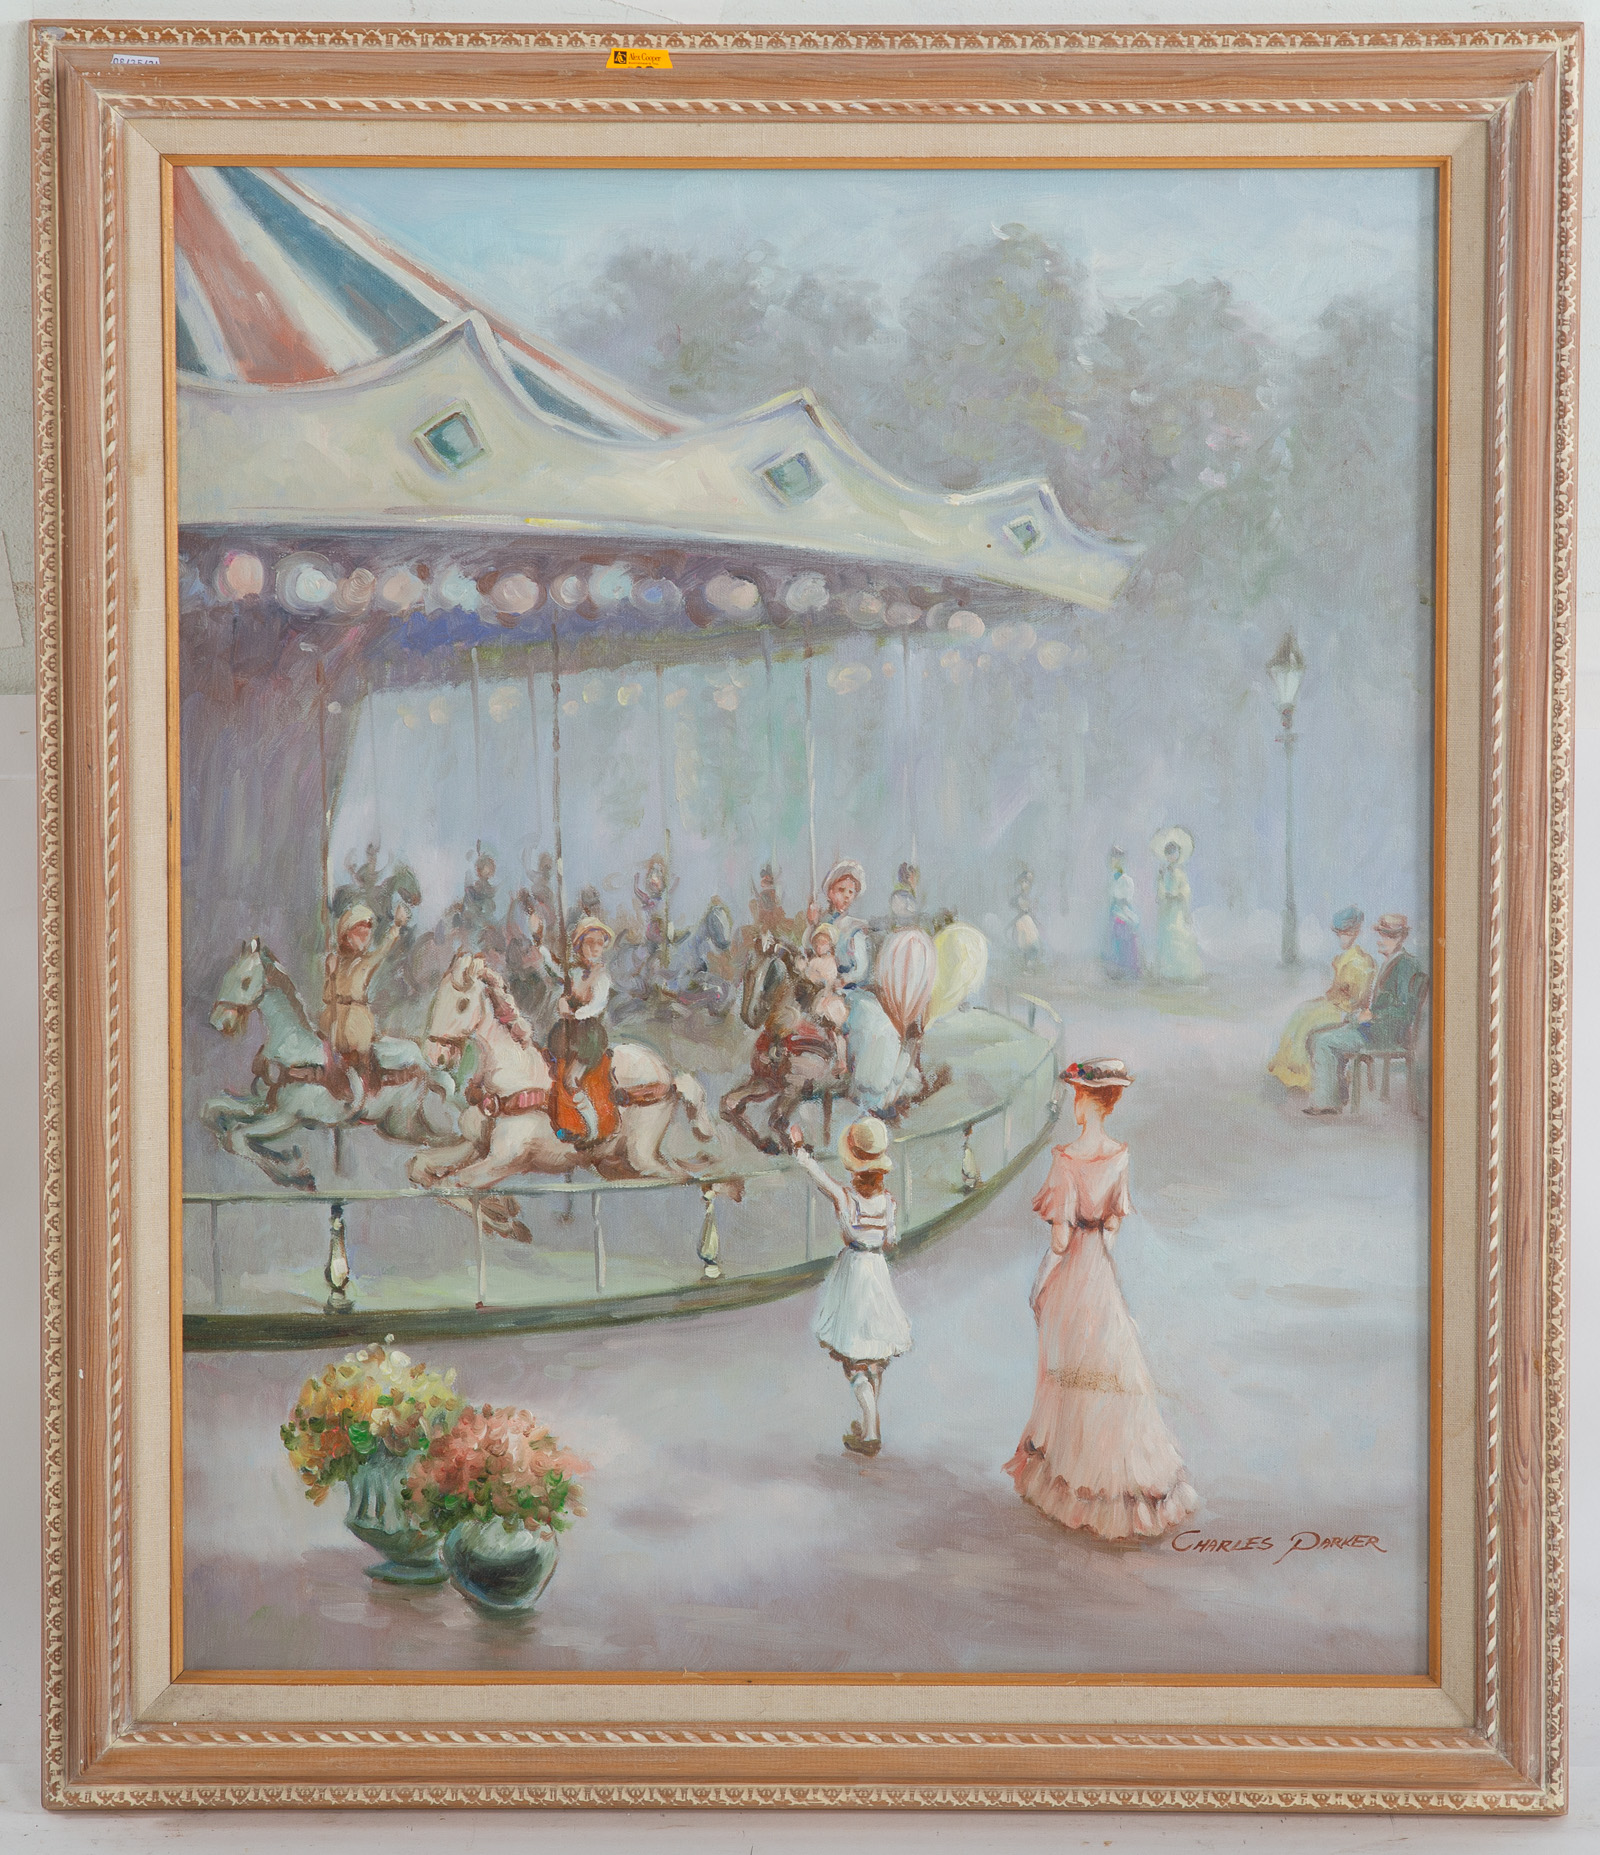 CHARLES PARKER. CAROUSEL IN THE PARK,